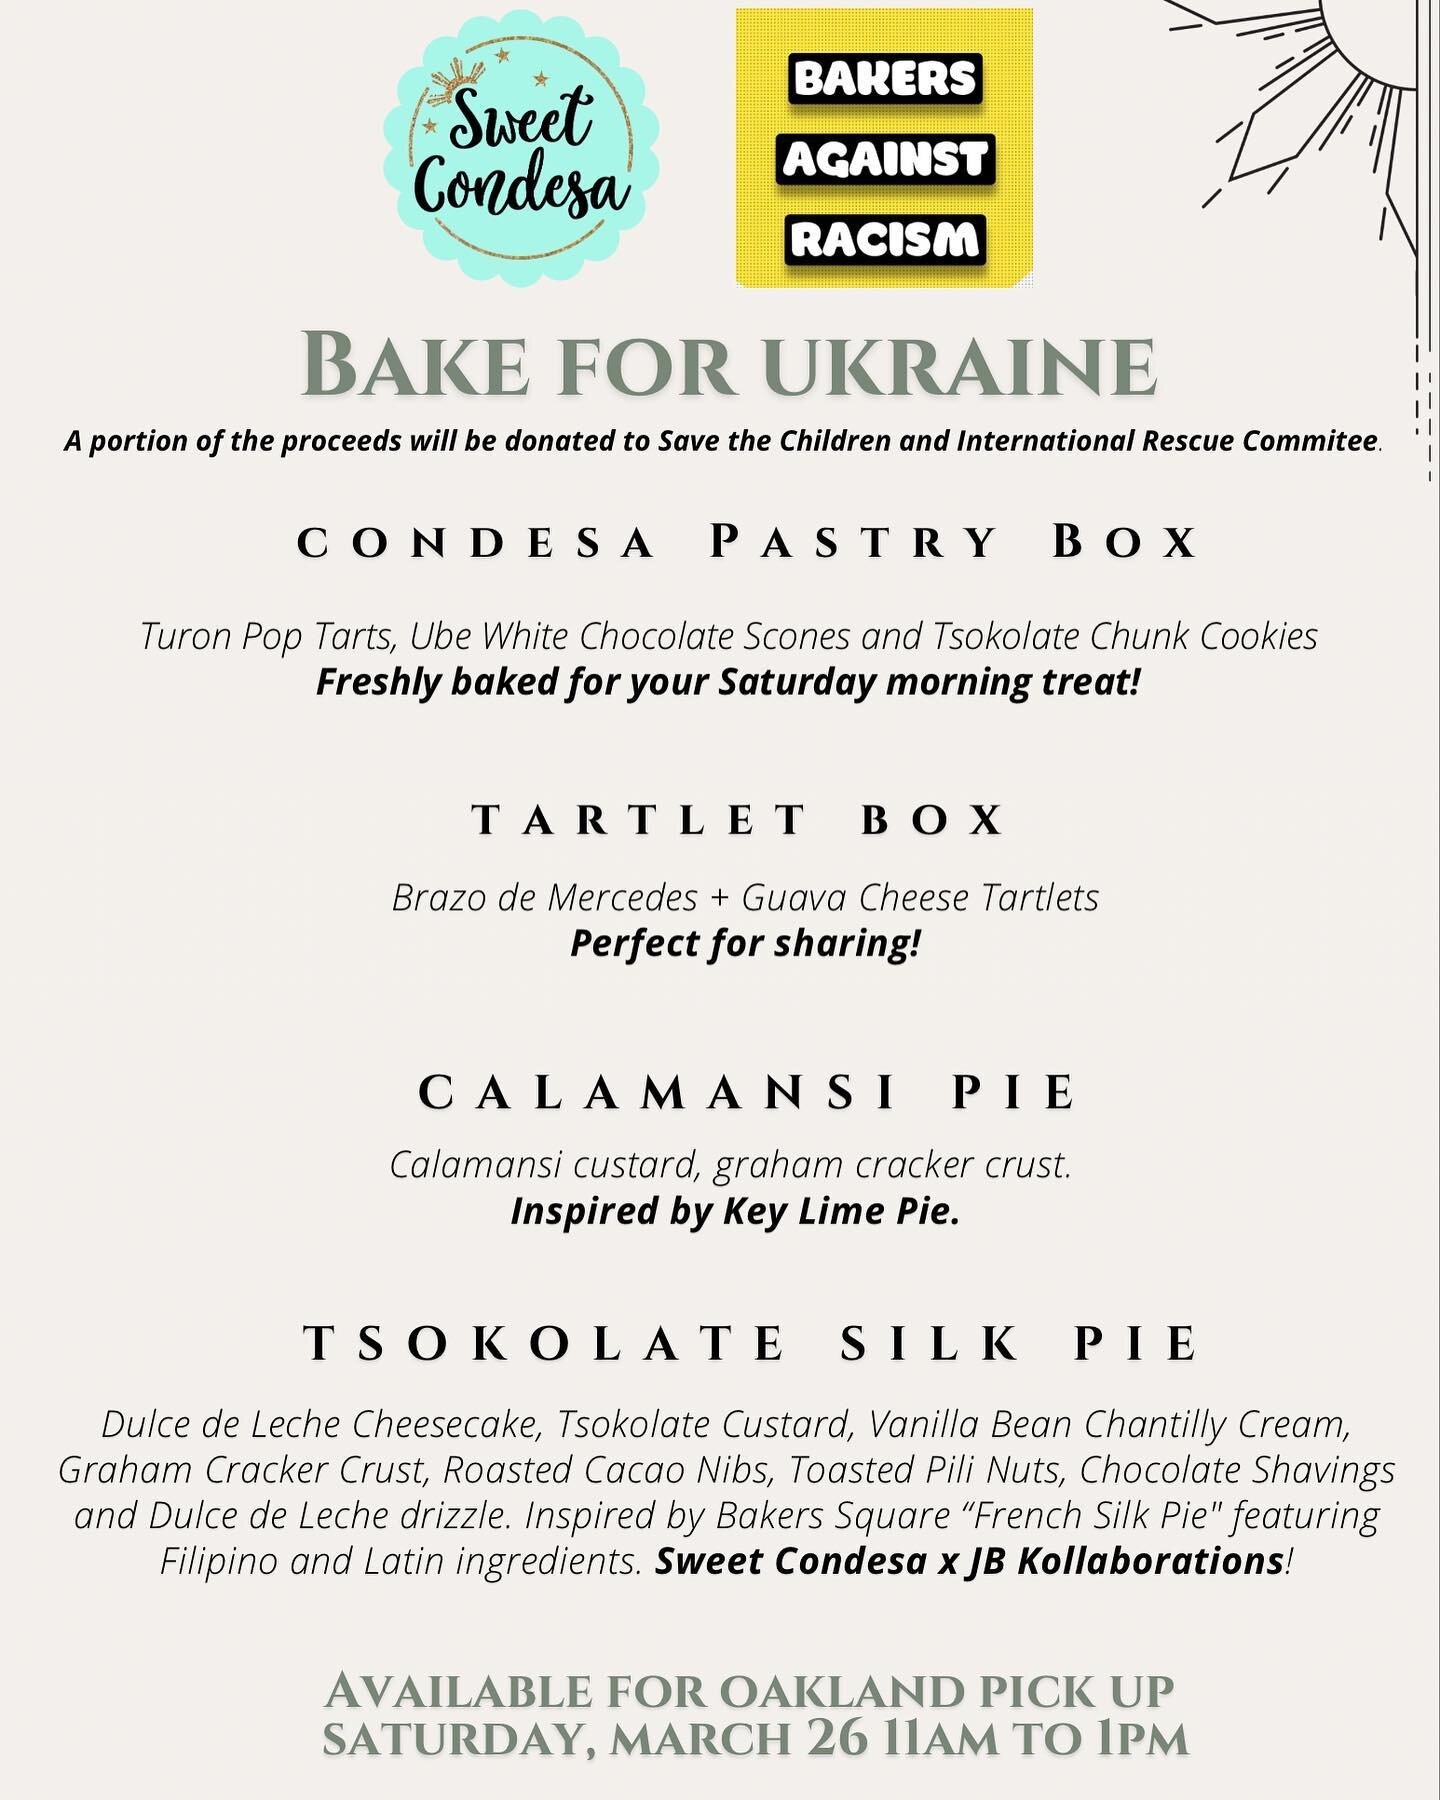 We are activating #bakersagainstracism in an Emergency Bake Sale #bakeforukraine. A portion of the proceeds will be donated to @savethechildren and @rescueorg. 

Preorder opens at noon today for 3/26 pickup in West Oakland. 

Thank you Chef Paola @sm